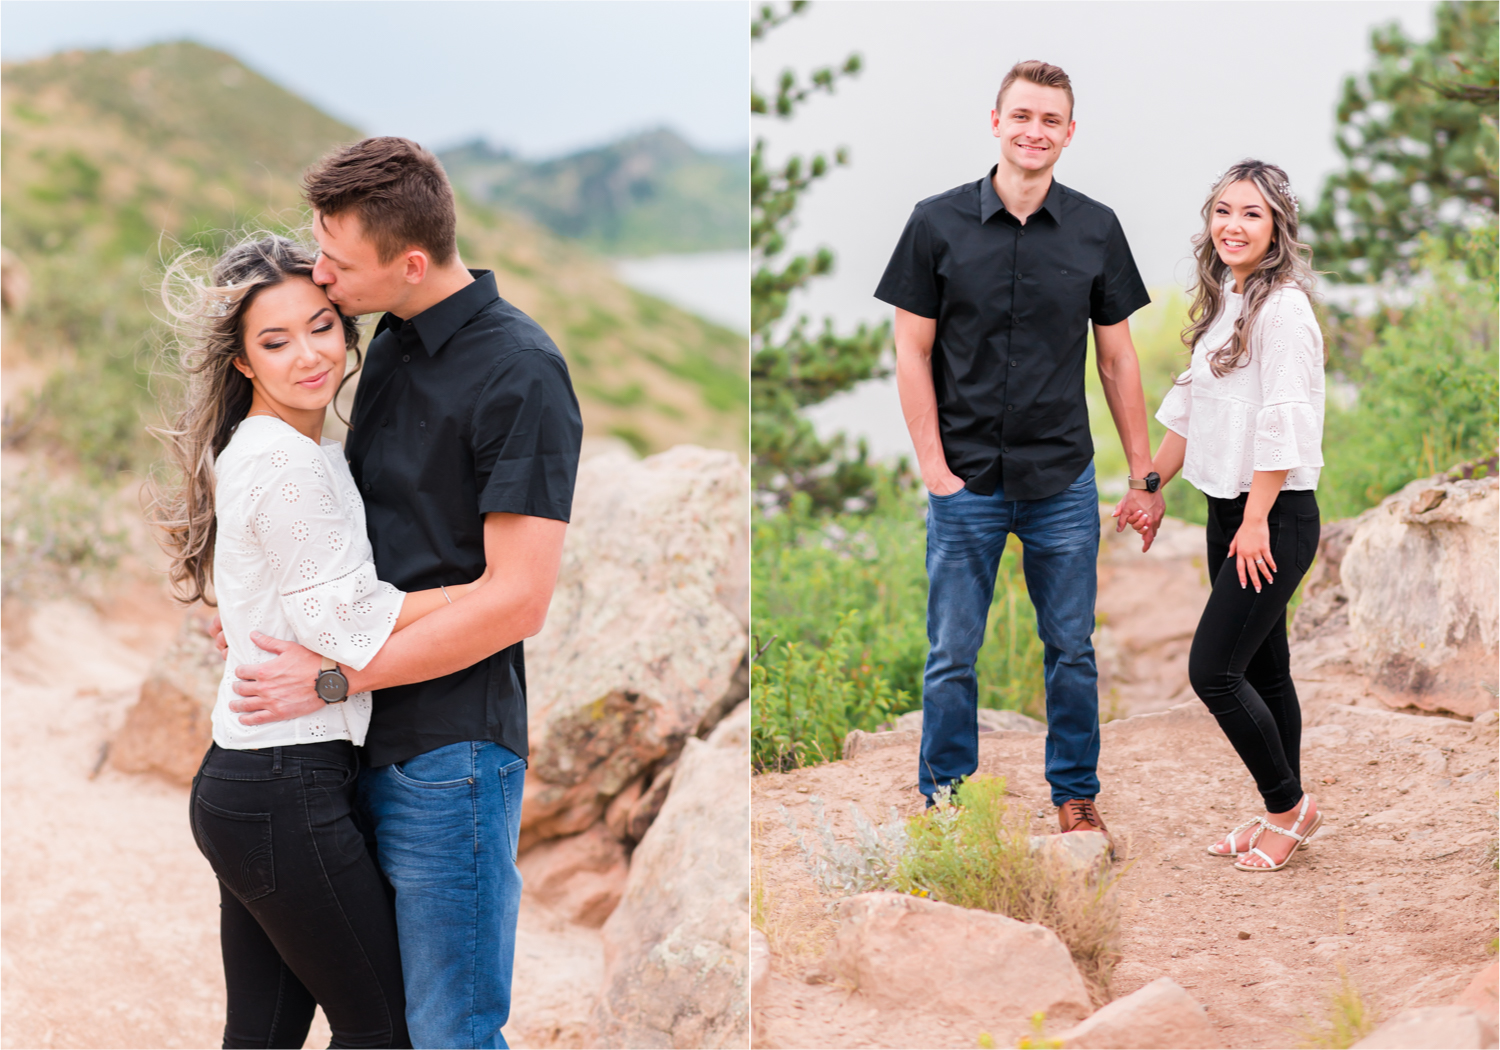 Romantic and Playful Summer engagement session at Horsetooth Reservoir in Fort Collins Colorado | Britni Girard Photographer | Wedding photographer and videographer team